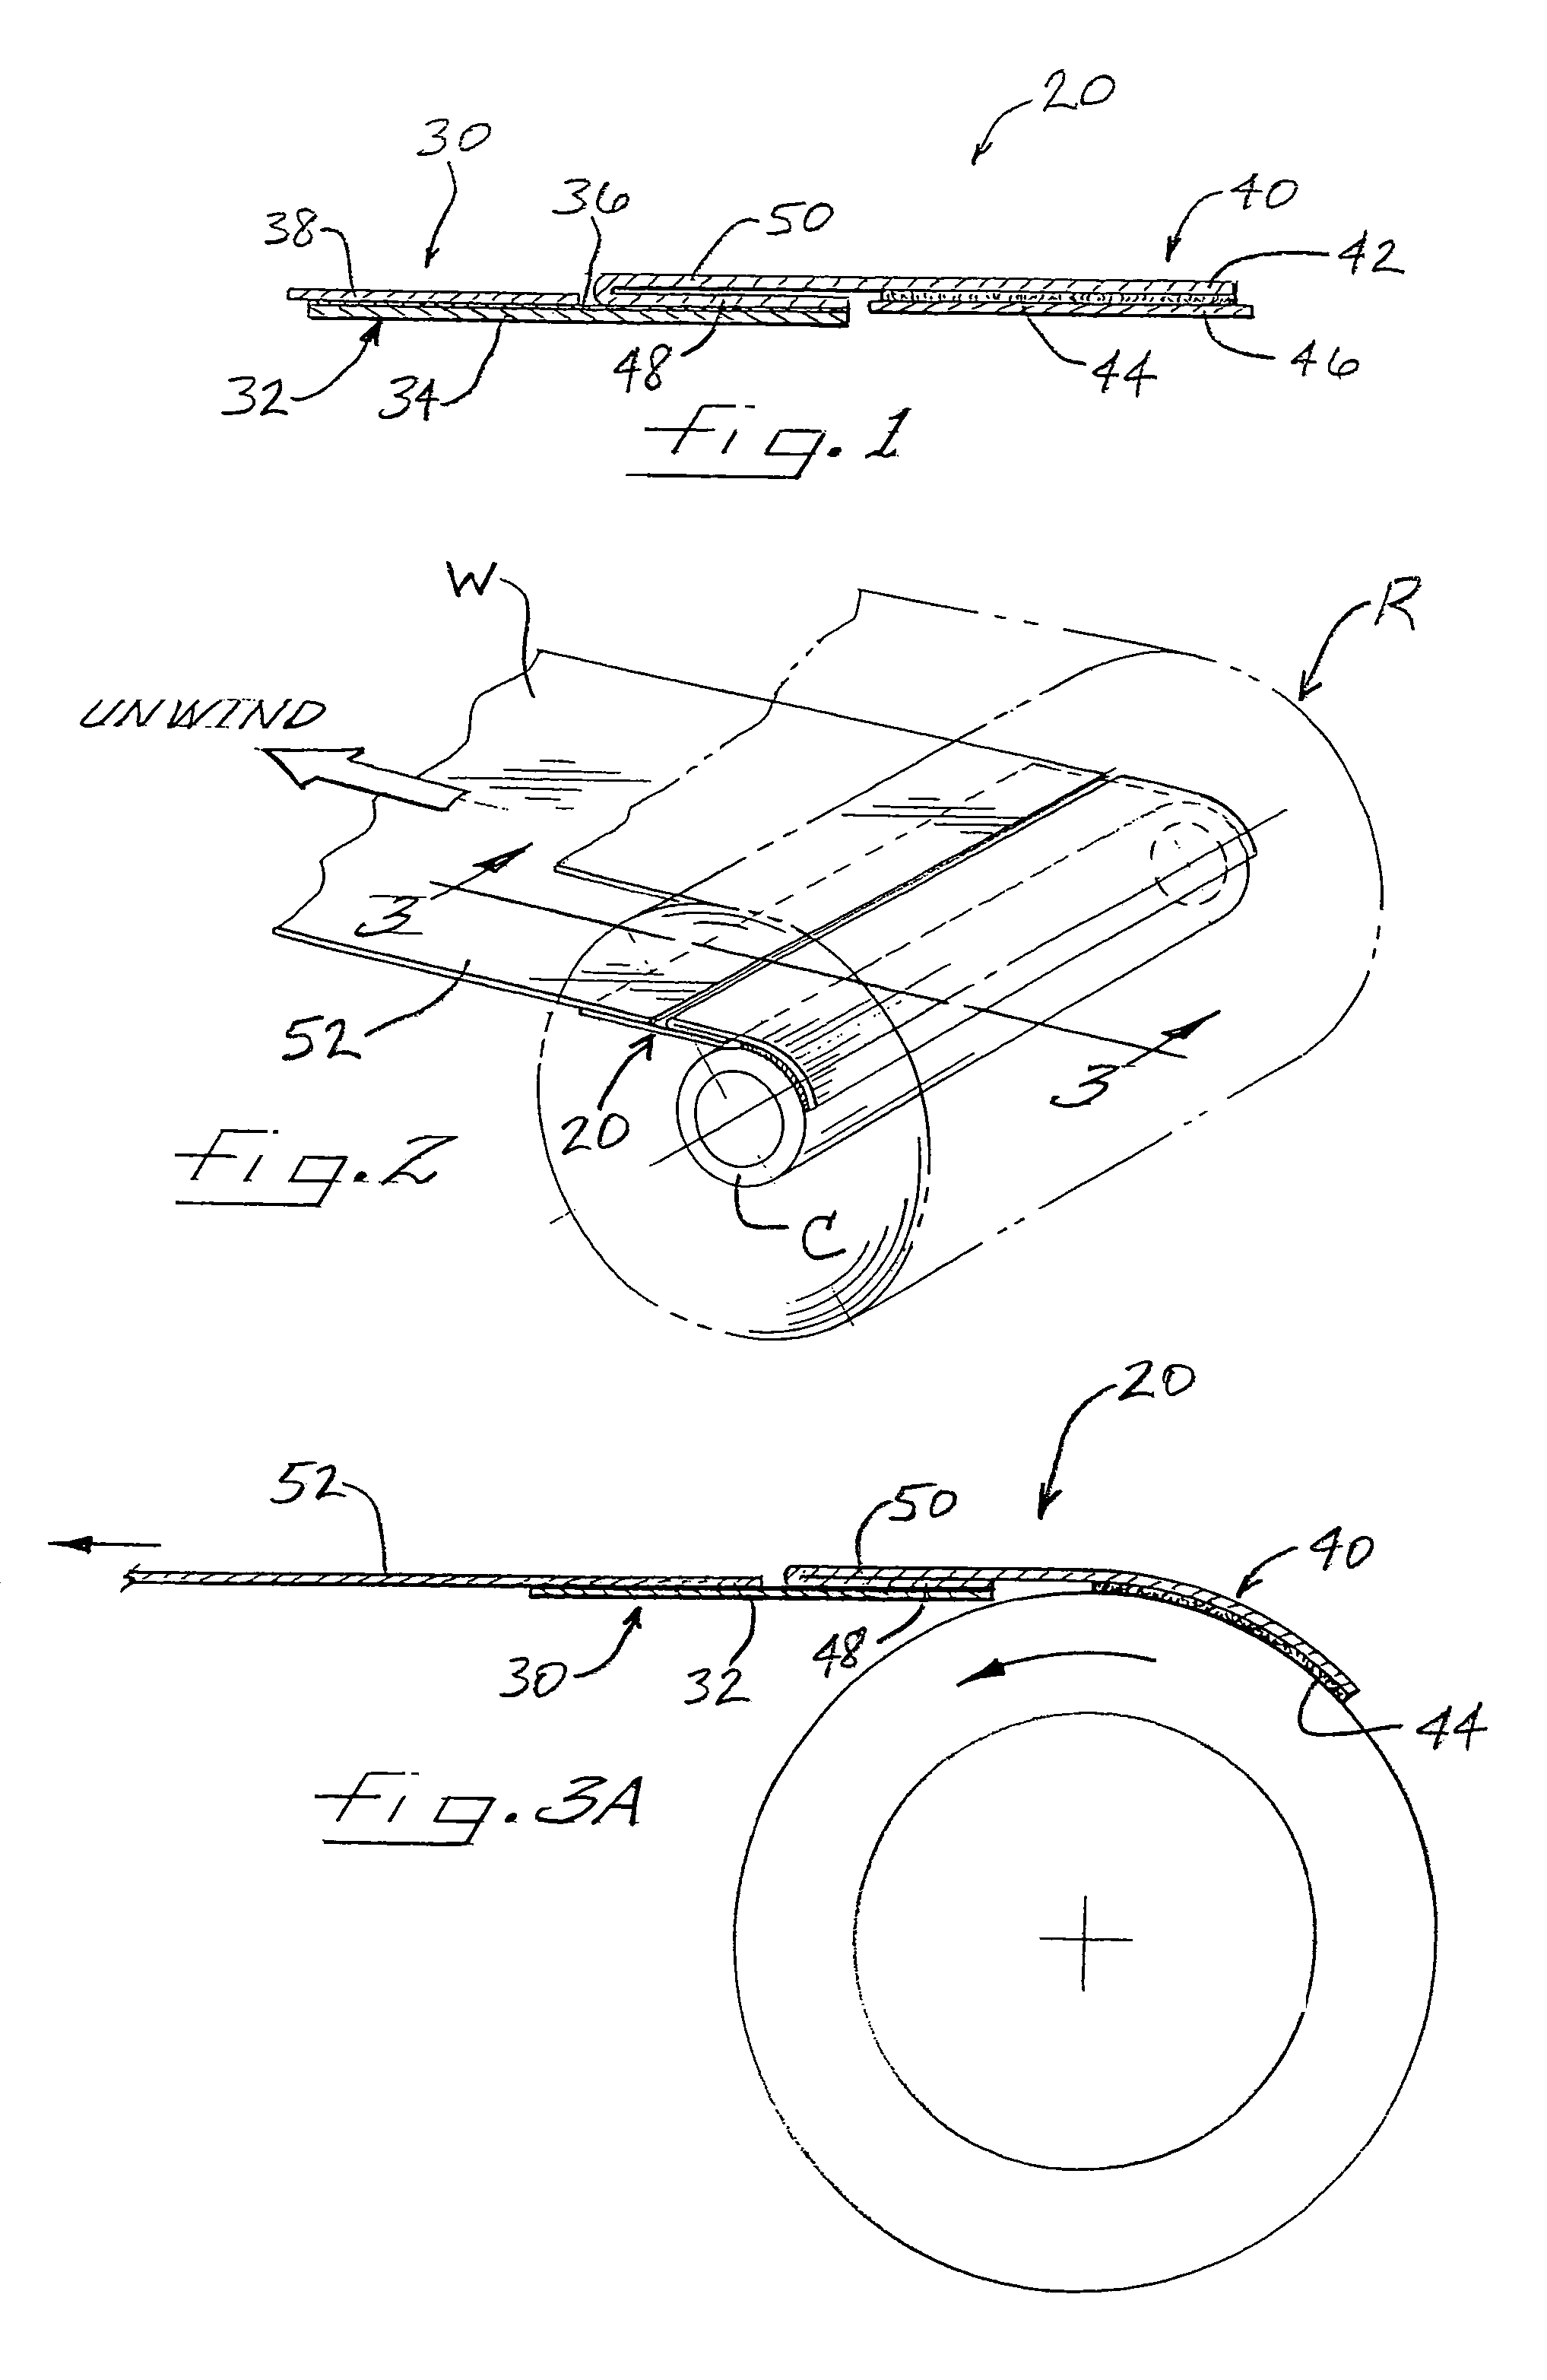 Dual-functioning mechanism for startup during winding of web material and for splicing during unwinding